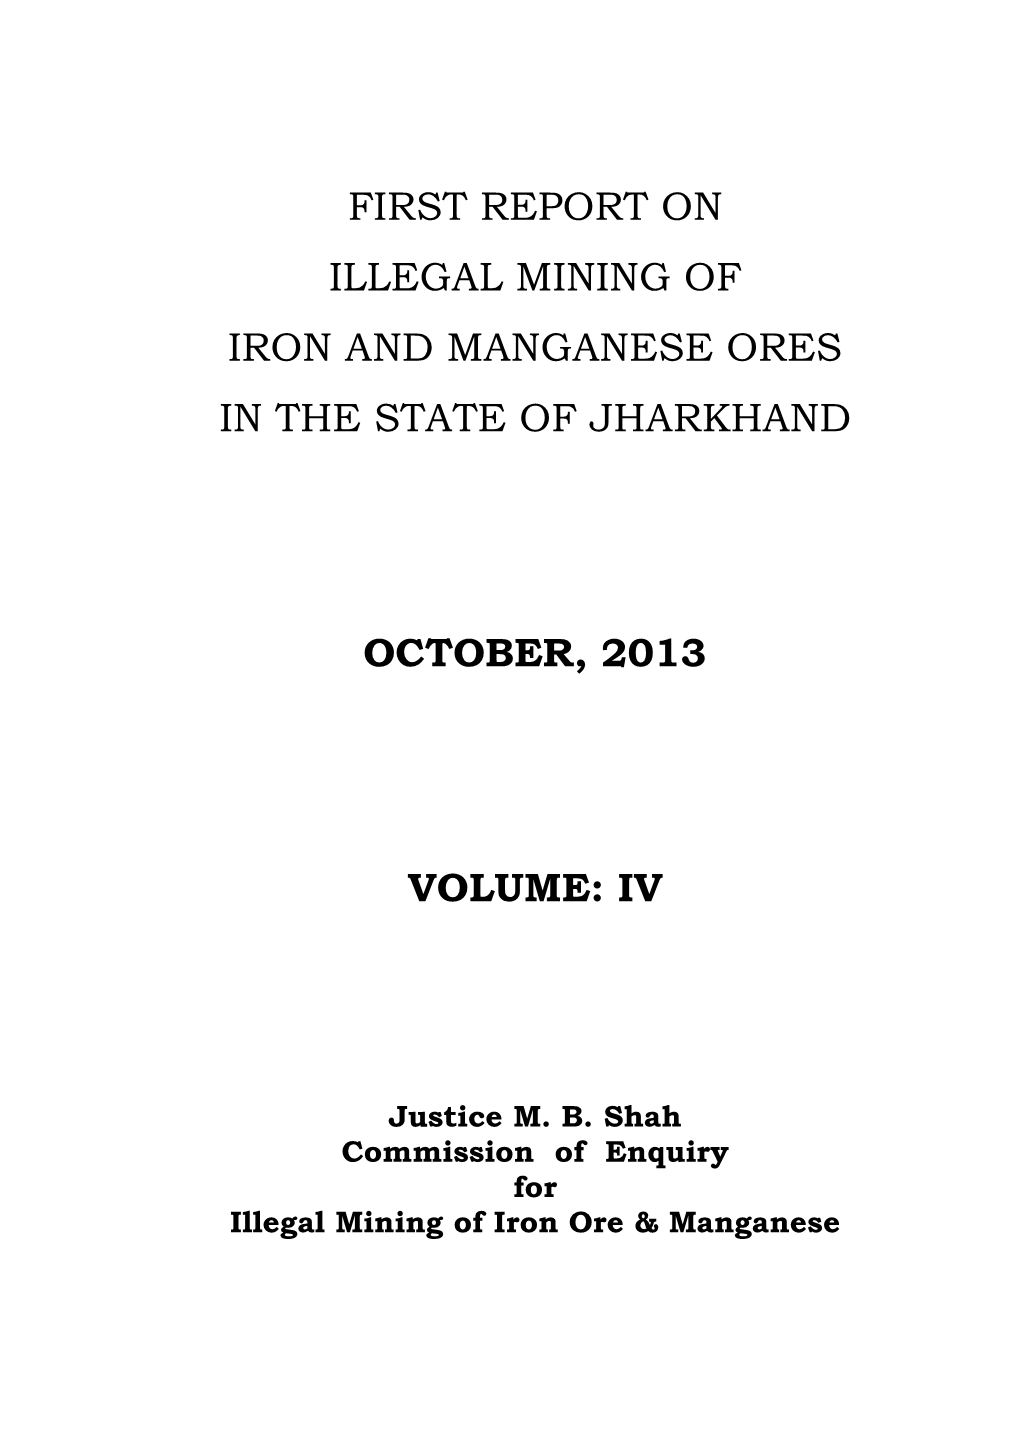 First Report on Illegal Mining of Iron and Manganese Ores in the State of Jharkhand